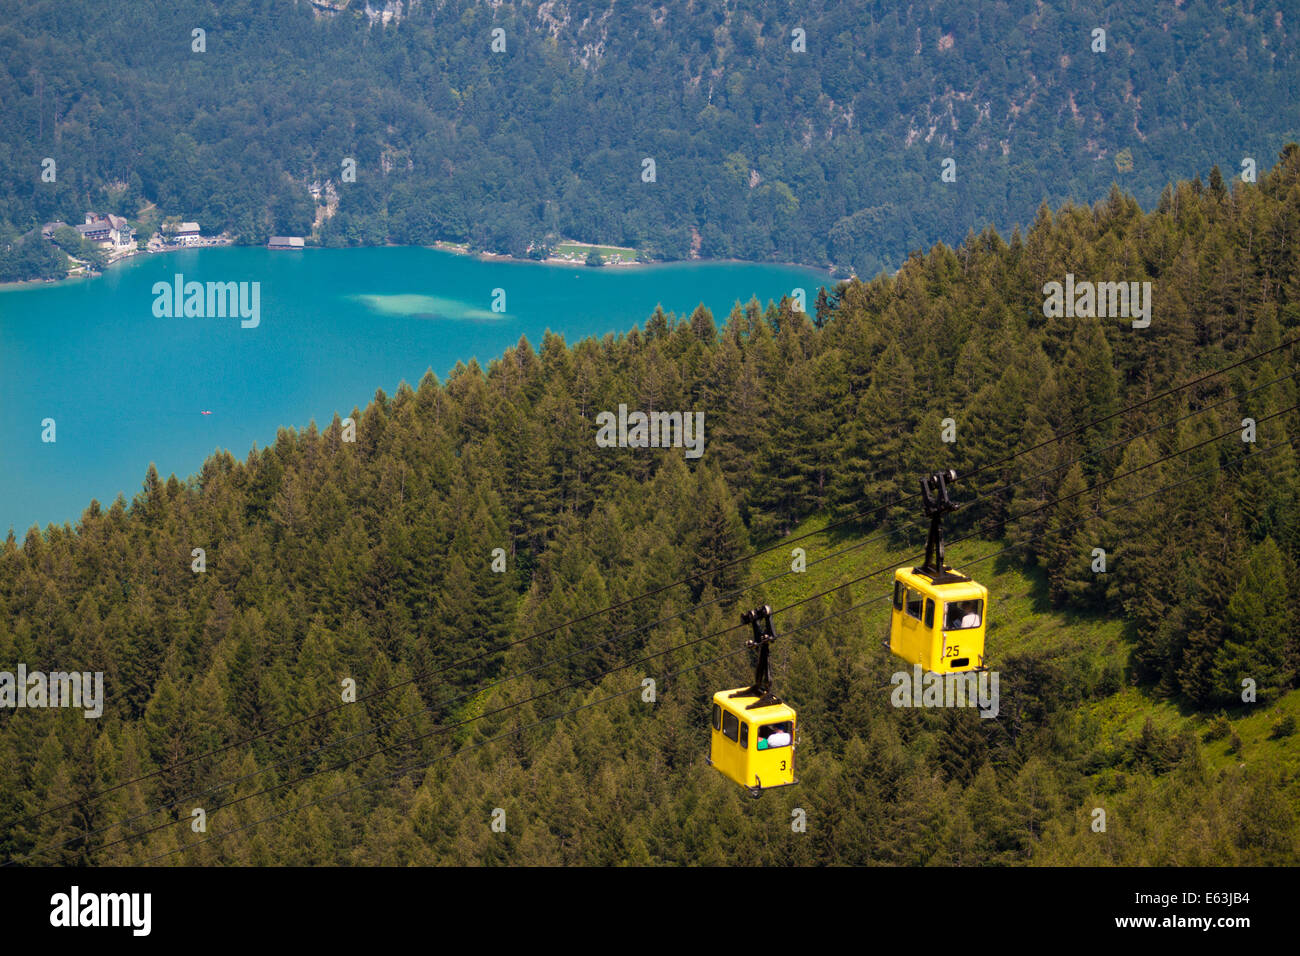 Zwoelfhorn cablecar in St. Gilgen Austria near the Wolfgangsee Stock Photo